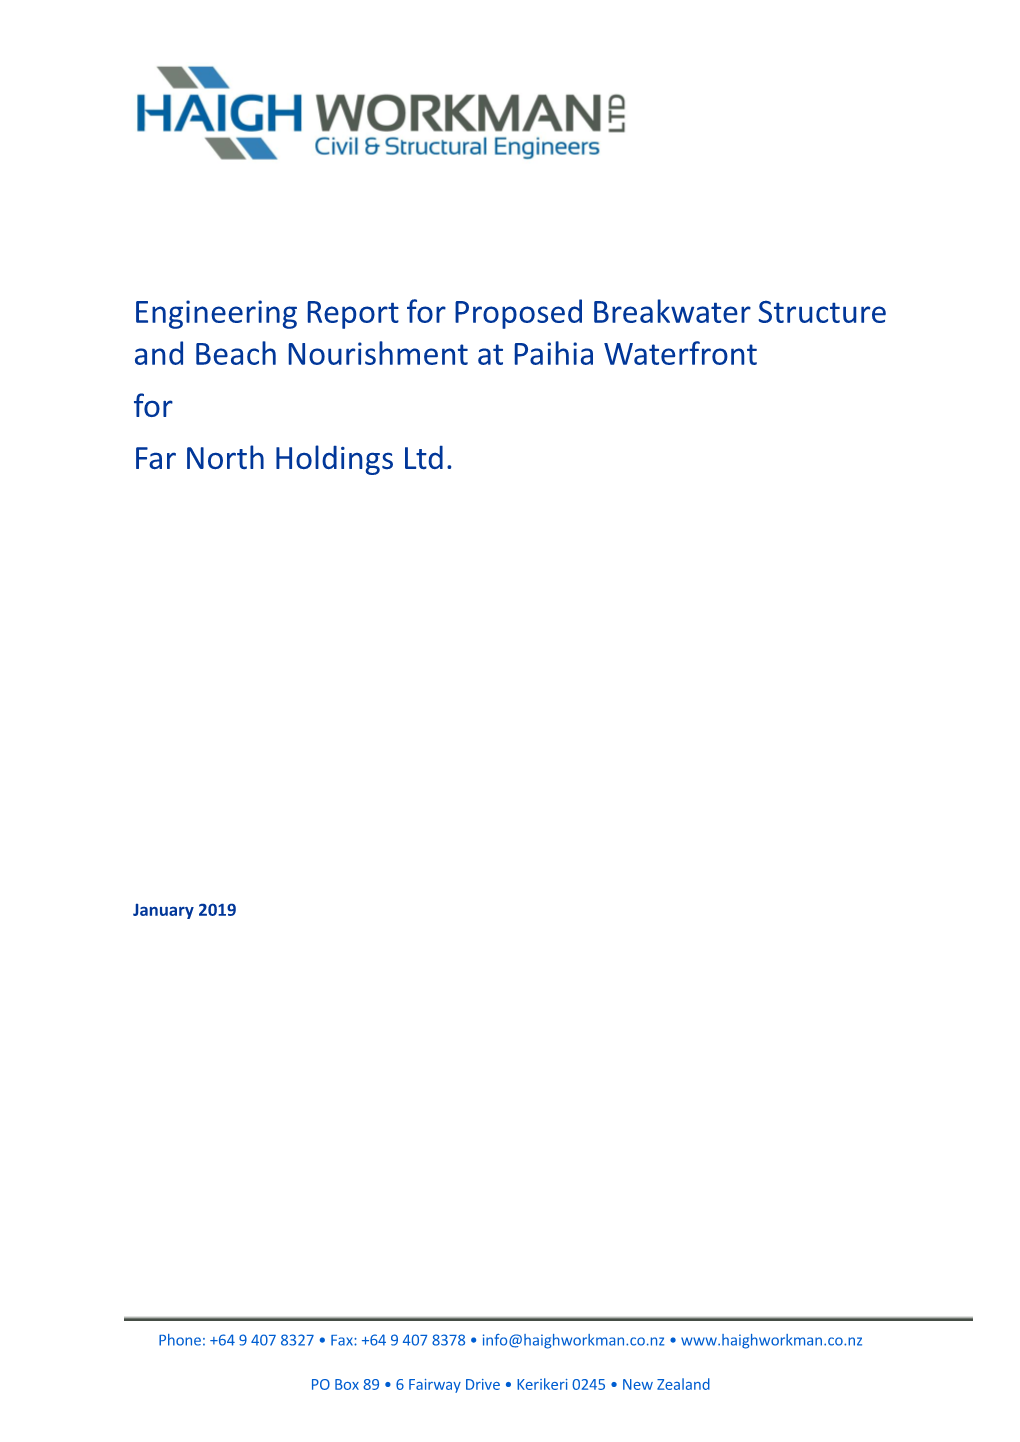 Engineering Report for Proposed Breakwater Structure and Beach Nourishment at Paihia Waterfront for Far North Holdings Ltd